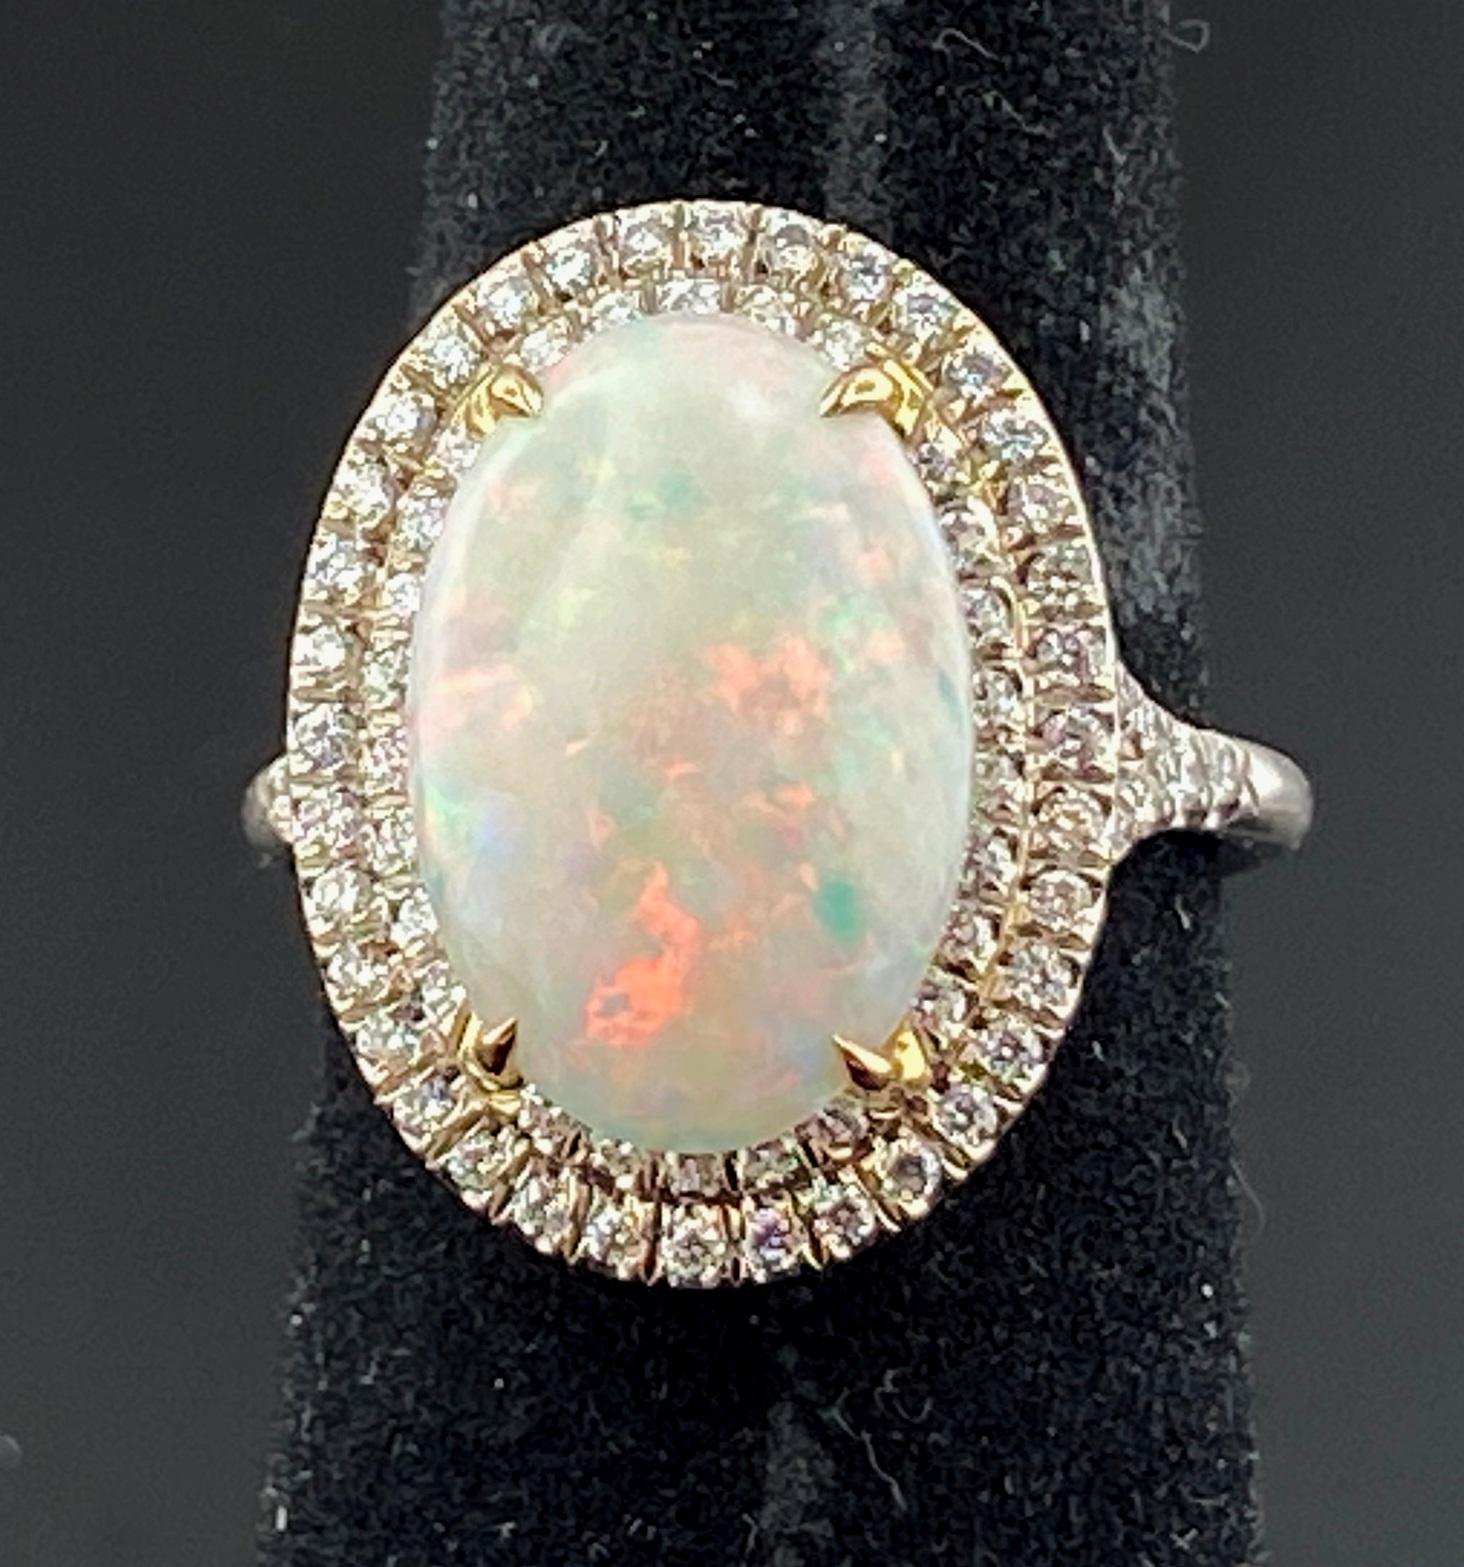 Set in 18 karat white gold is 15 x 11 mm oval Opal surrounded with 82 round brilliant cut diamonds in a two row frame with a total diamond weight of 0.60 carats.  Ring size is 6.25.